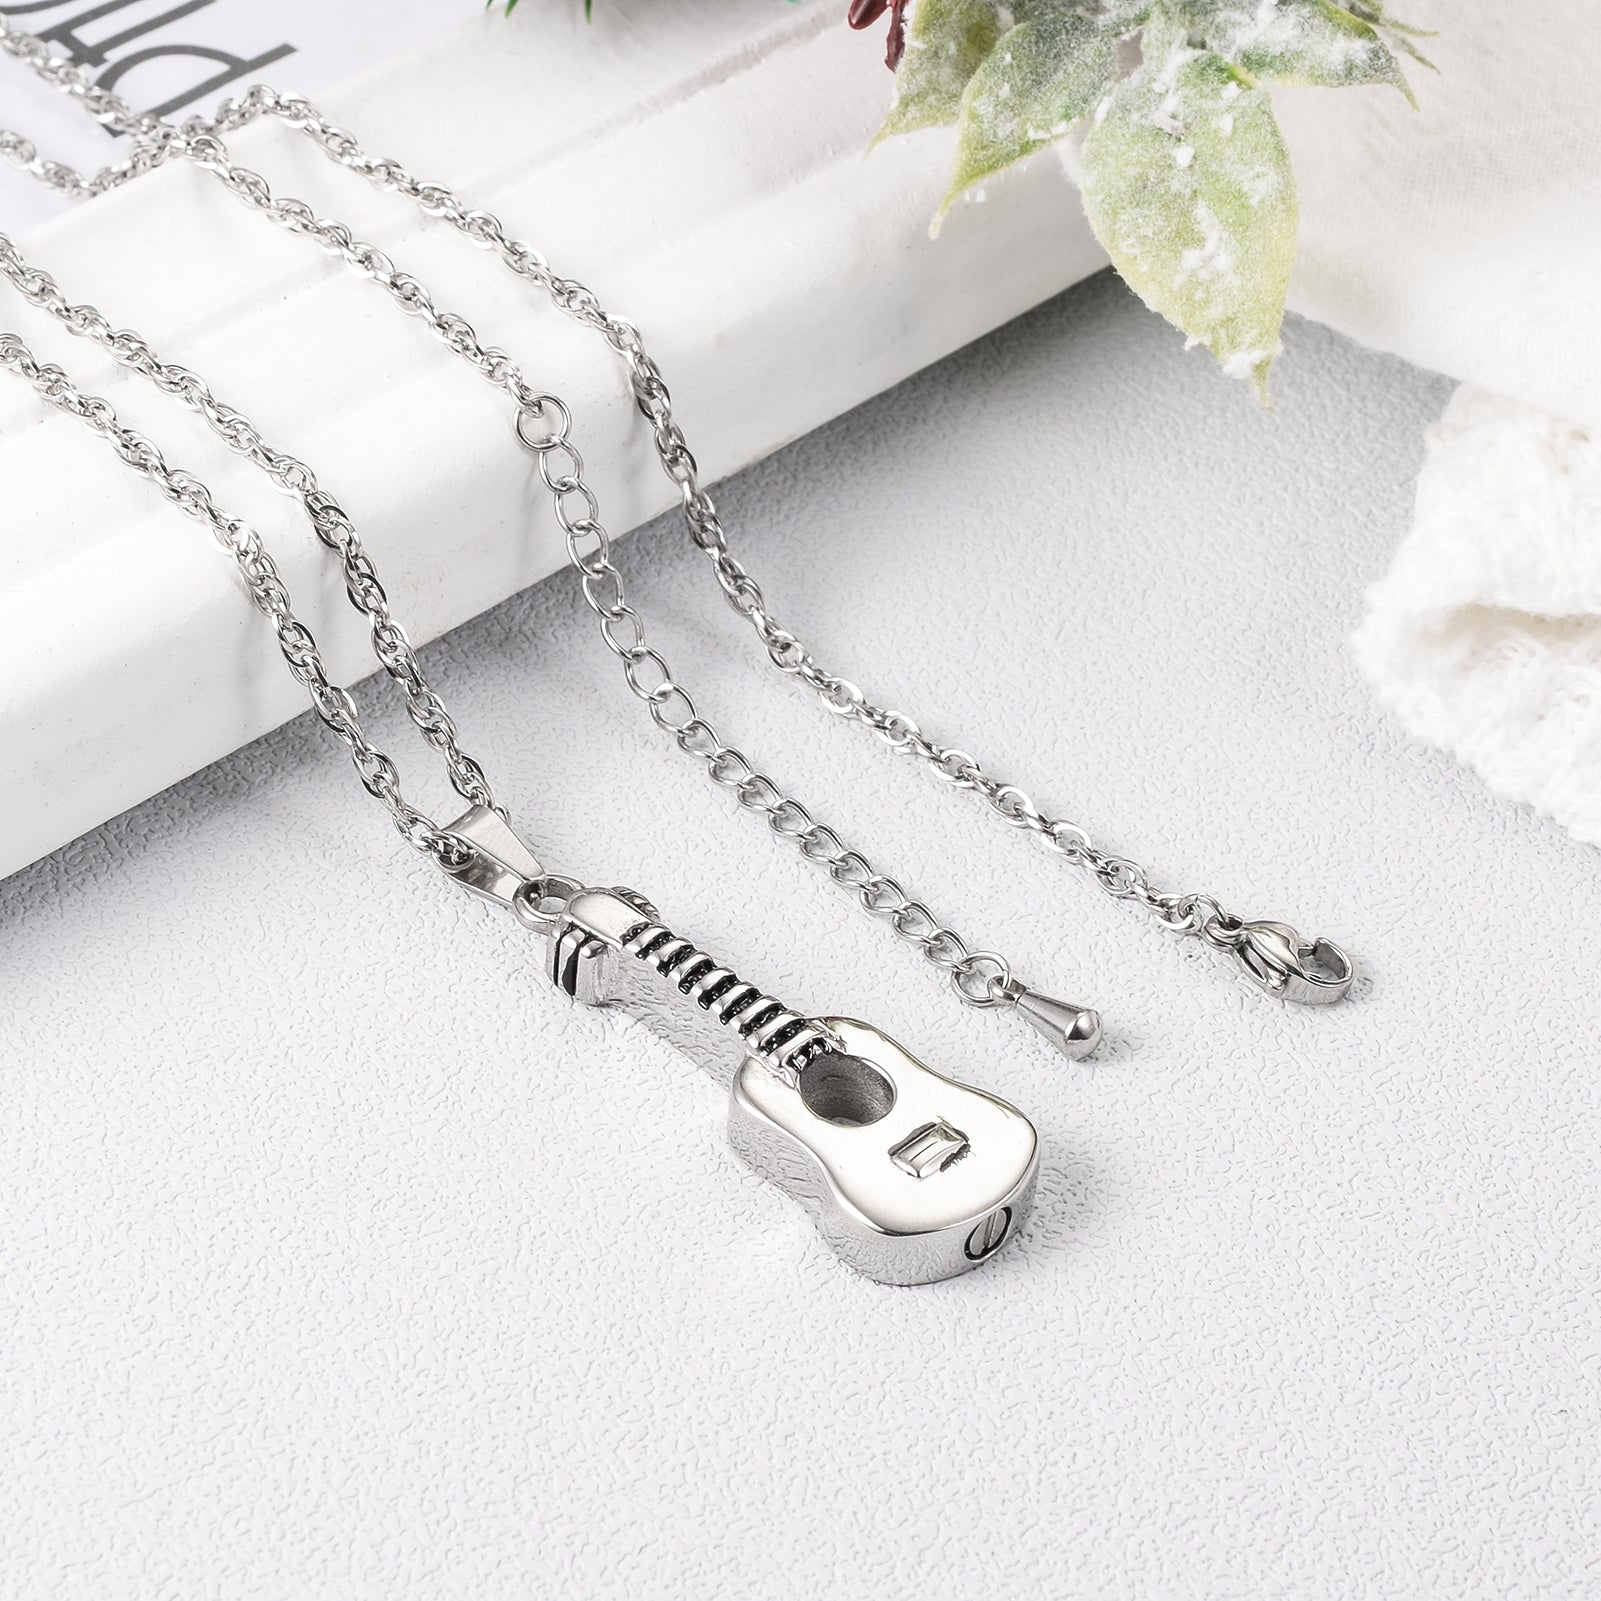 925 Sterling Silver Guitar Cremation Jewelry for Ash - Urn Necklace Musical  Memorial Pendant Bereavement Keepsake Gift for Loss of Guitarist or Music  Lover : Amazon.ca: Clothing, Shoes & Accessories